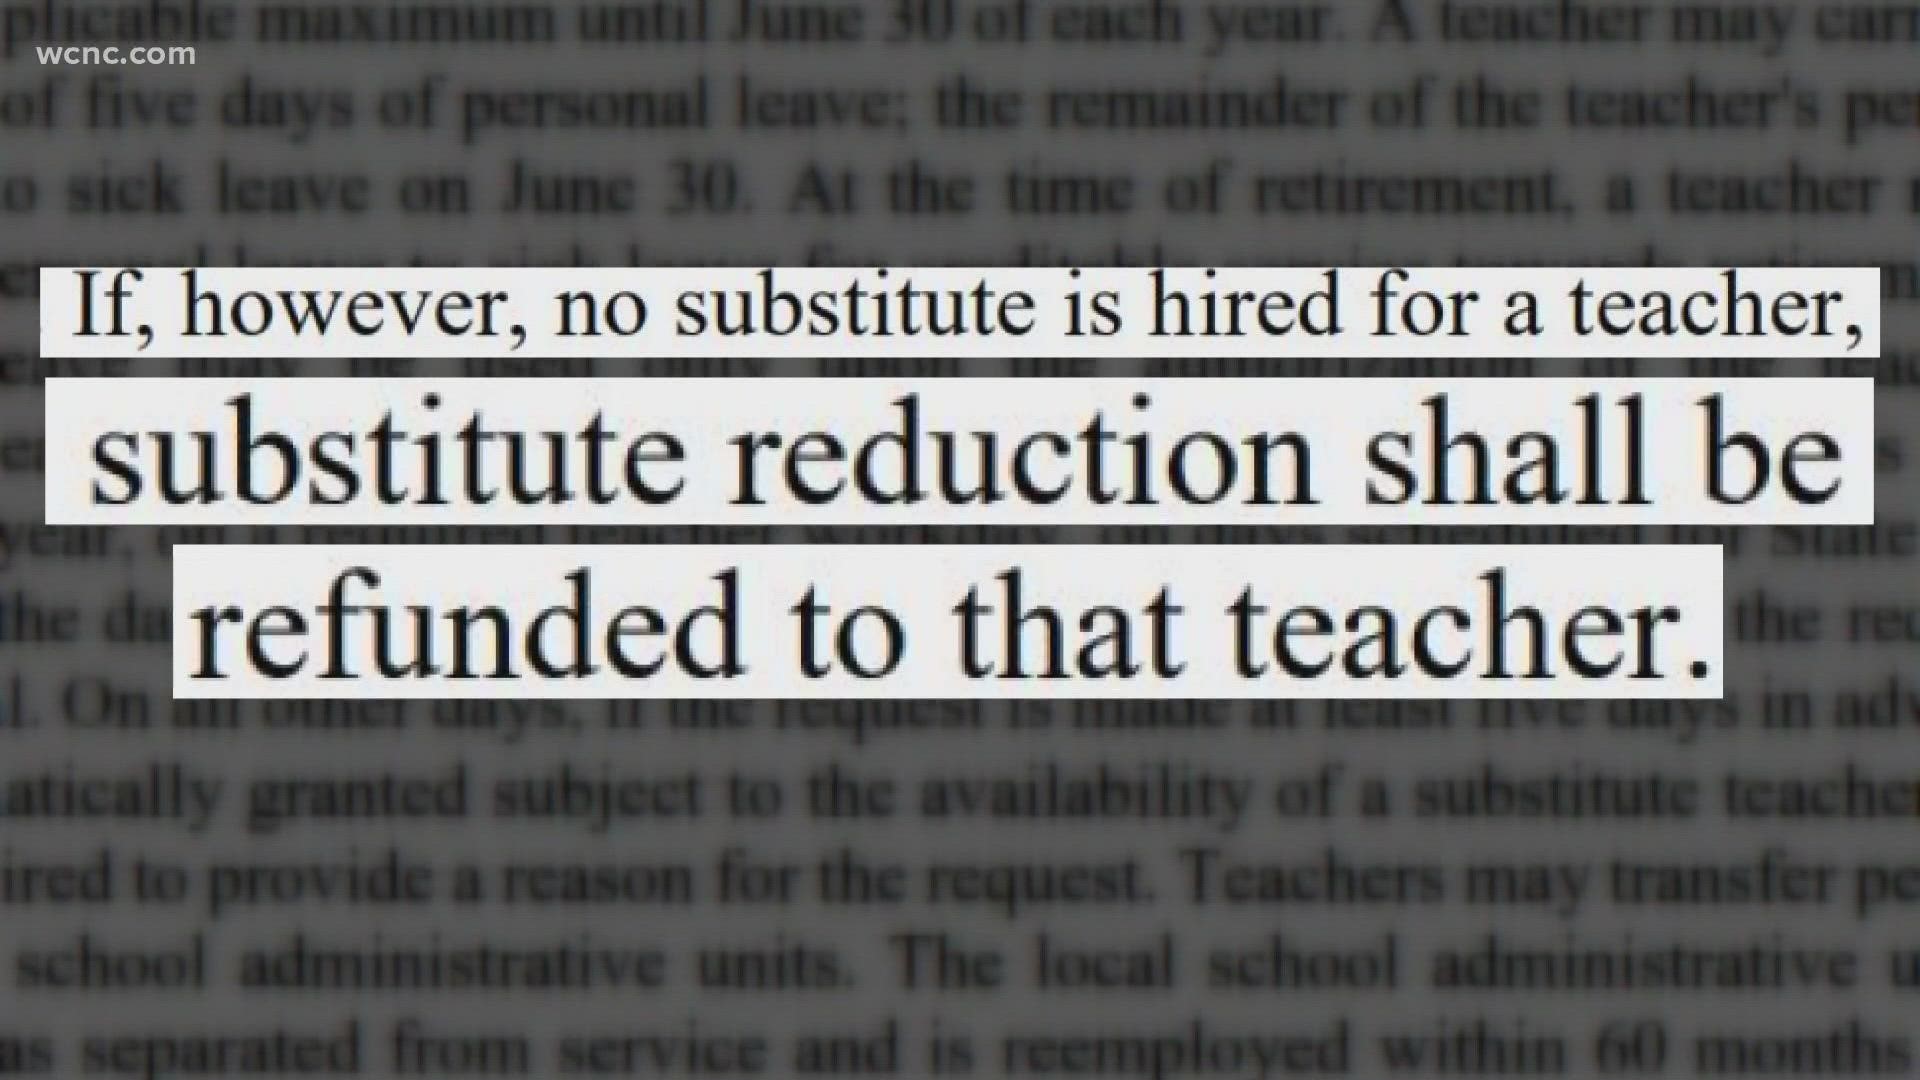 State law requires school districts to charge teachers $50 when they take personal leave. That same law mandates refunds when subs aren't hired.